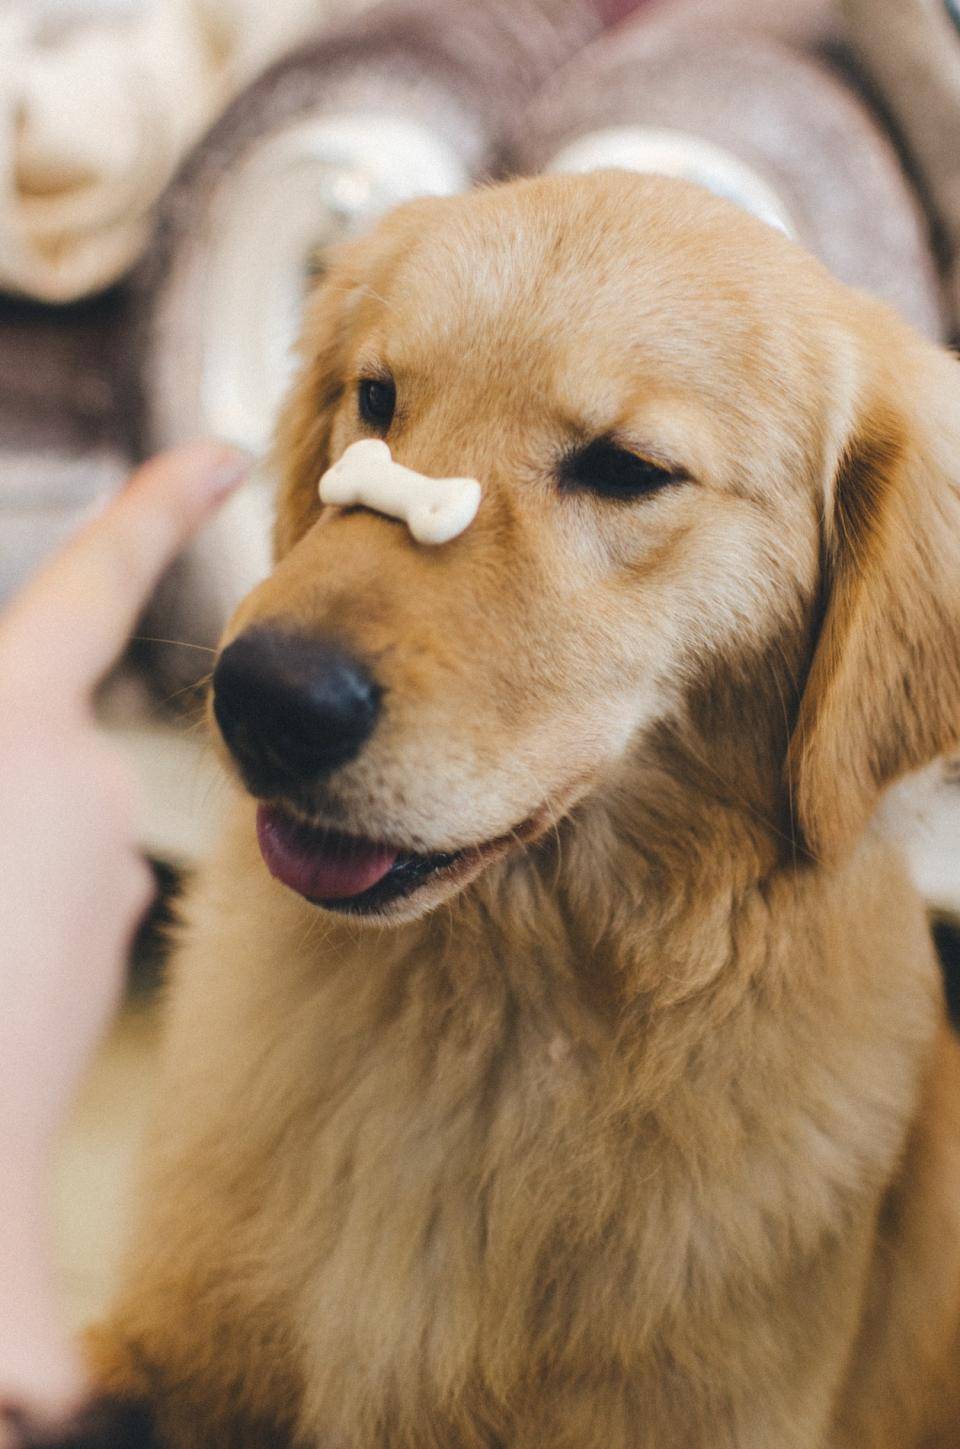 A heckin' good boy waits patiently with a biscuit balanced on his nose